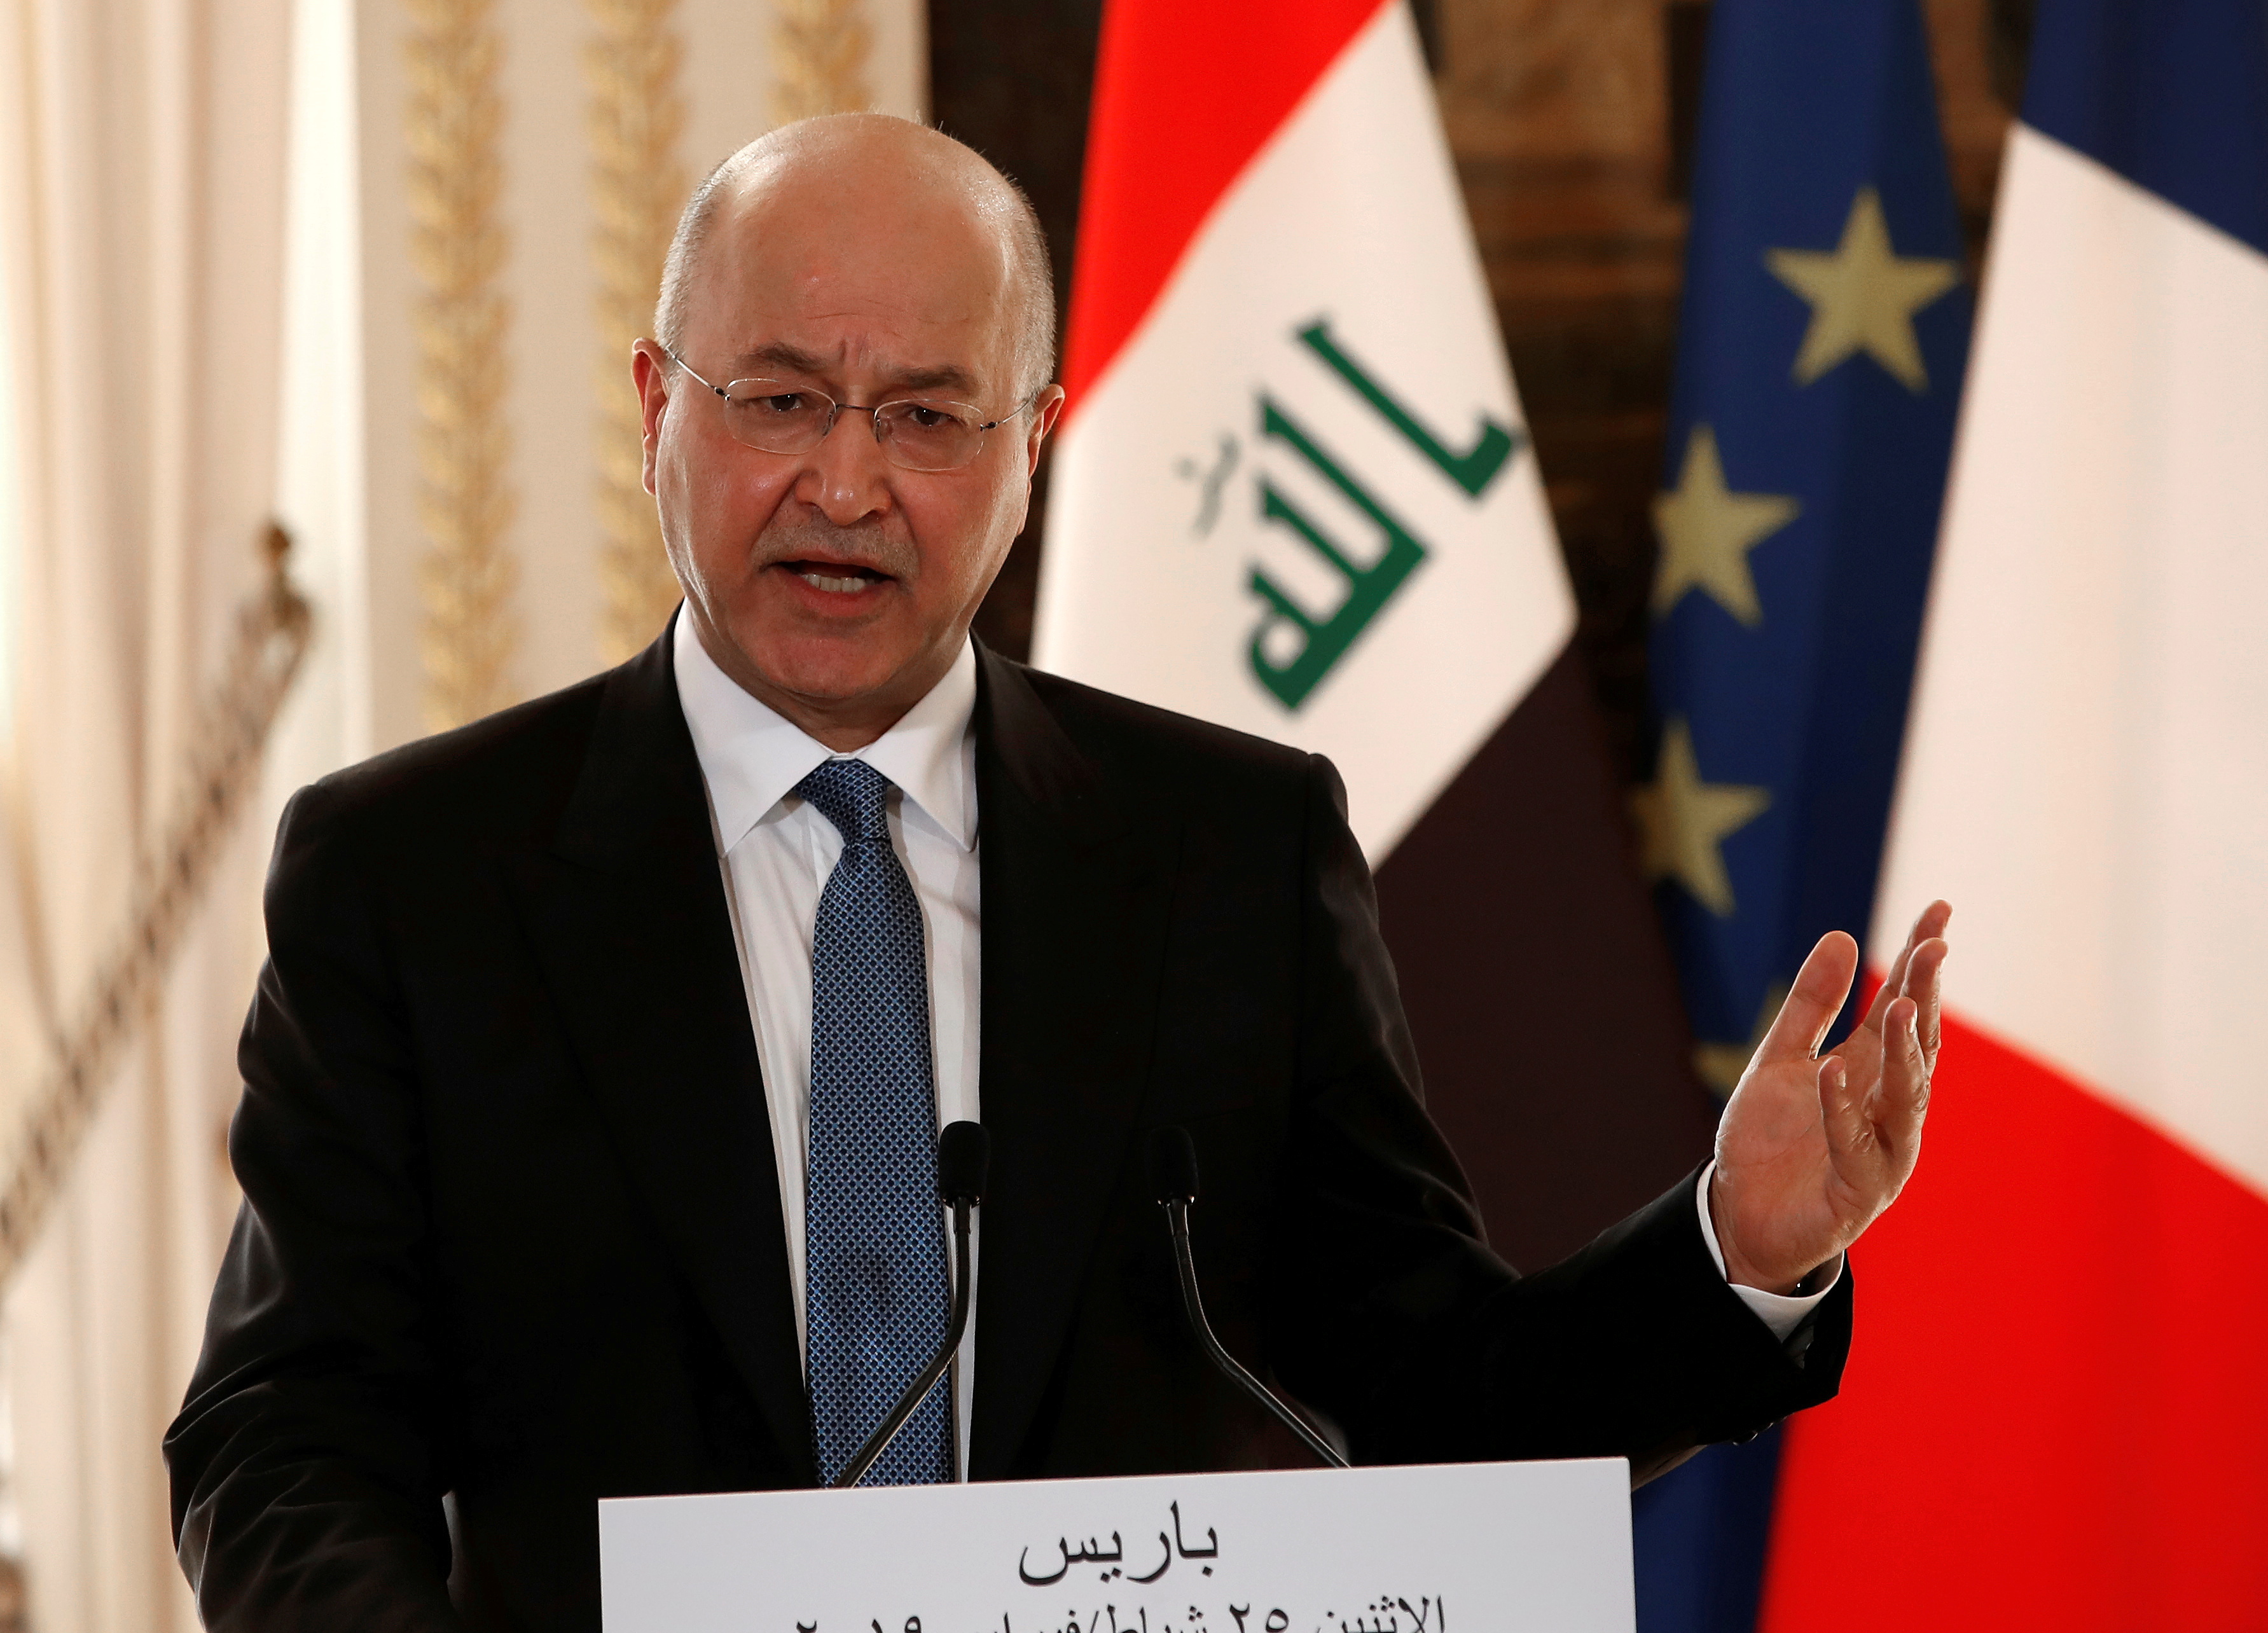 Iraqi President Barham Salih speaks during a news conference at the Elysee Palace in Paris, France,